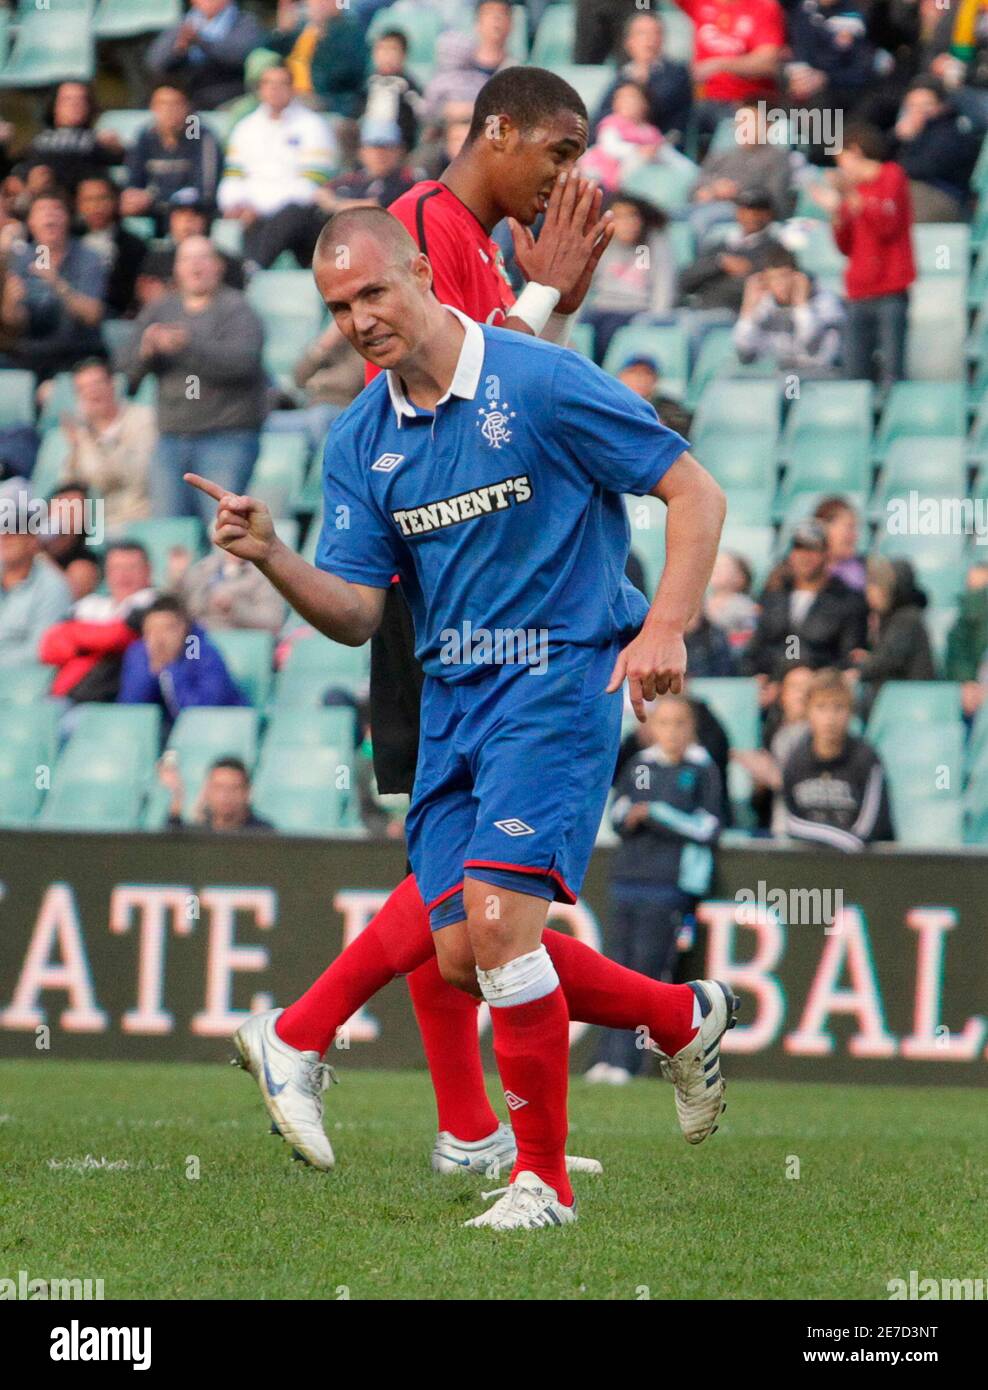 Kenny Miller (front) of Glasgow Rangers FC celebrates scoring against Blackburn Rovers FC during their soccer match as part of the Sydney 2010 Festival of Football at Sydney Football Stadium July 25, 2010.  REUTERS/Daniel Munoz (AUSTRALIA - Tags: SPORT SOCCER) Stock Photo